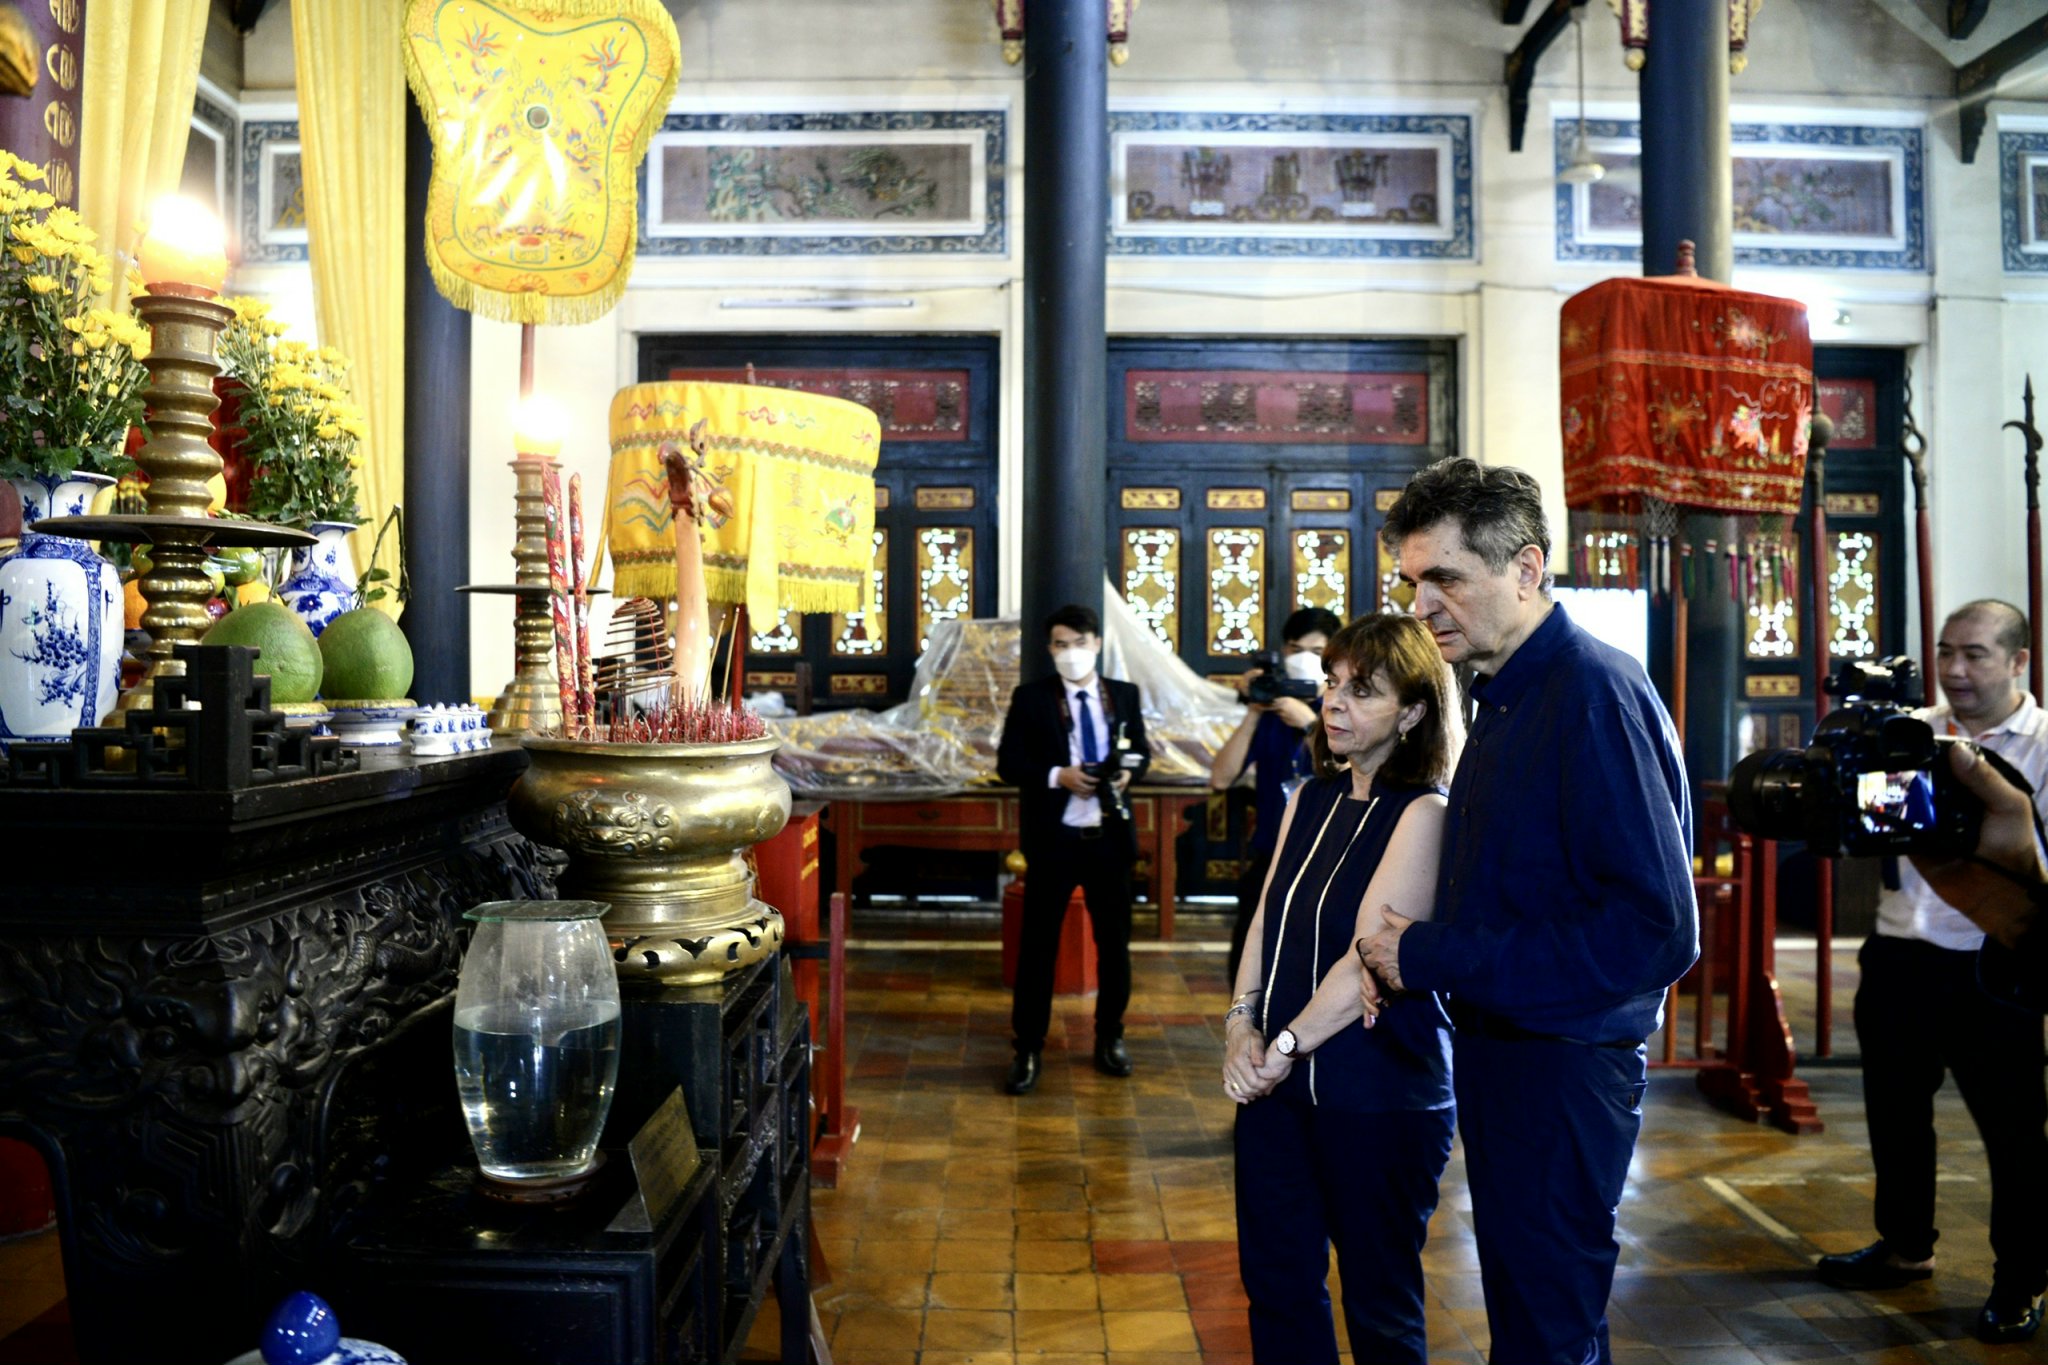 Greek President Katerina Sakellaropoulou and her husband visit the Hung Kings Temple at the Saigon Zoo and Botanical Gardens in Ho Chi Minh City, May 19, 2022. Photo: T.T.D. / Tuoi Tre